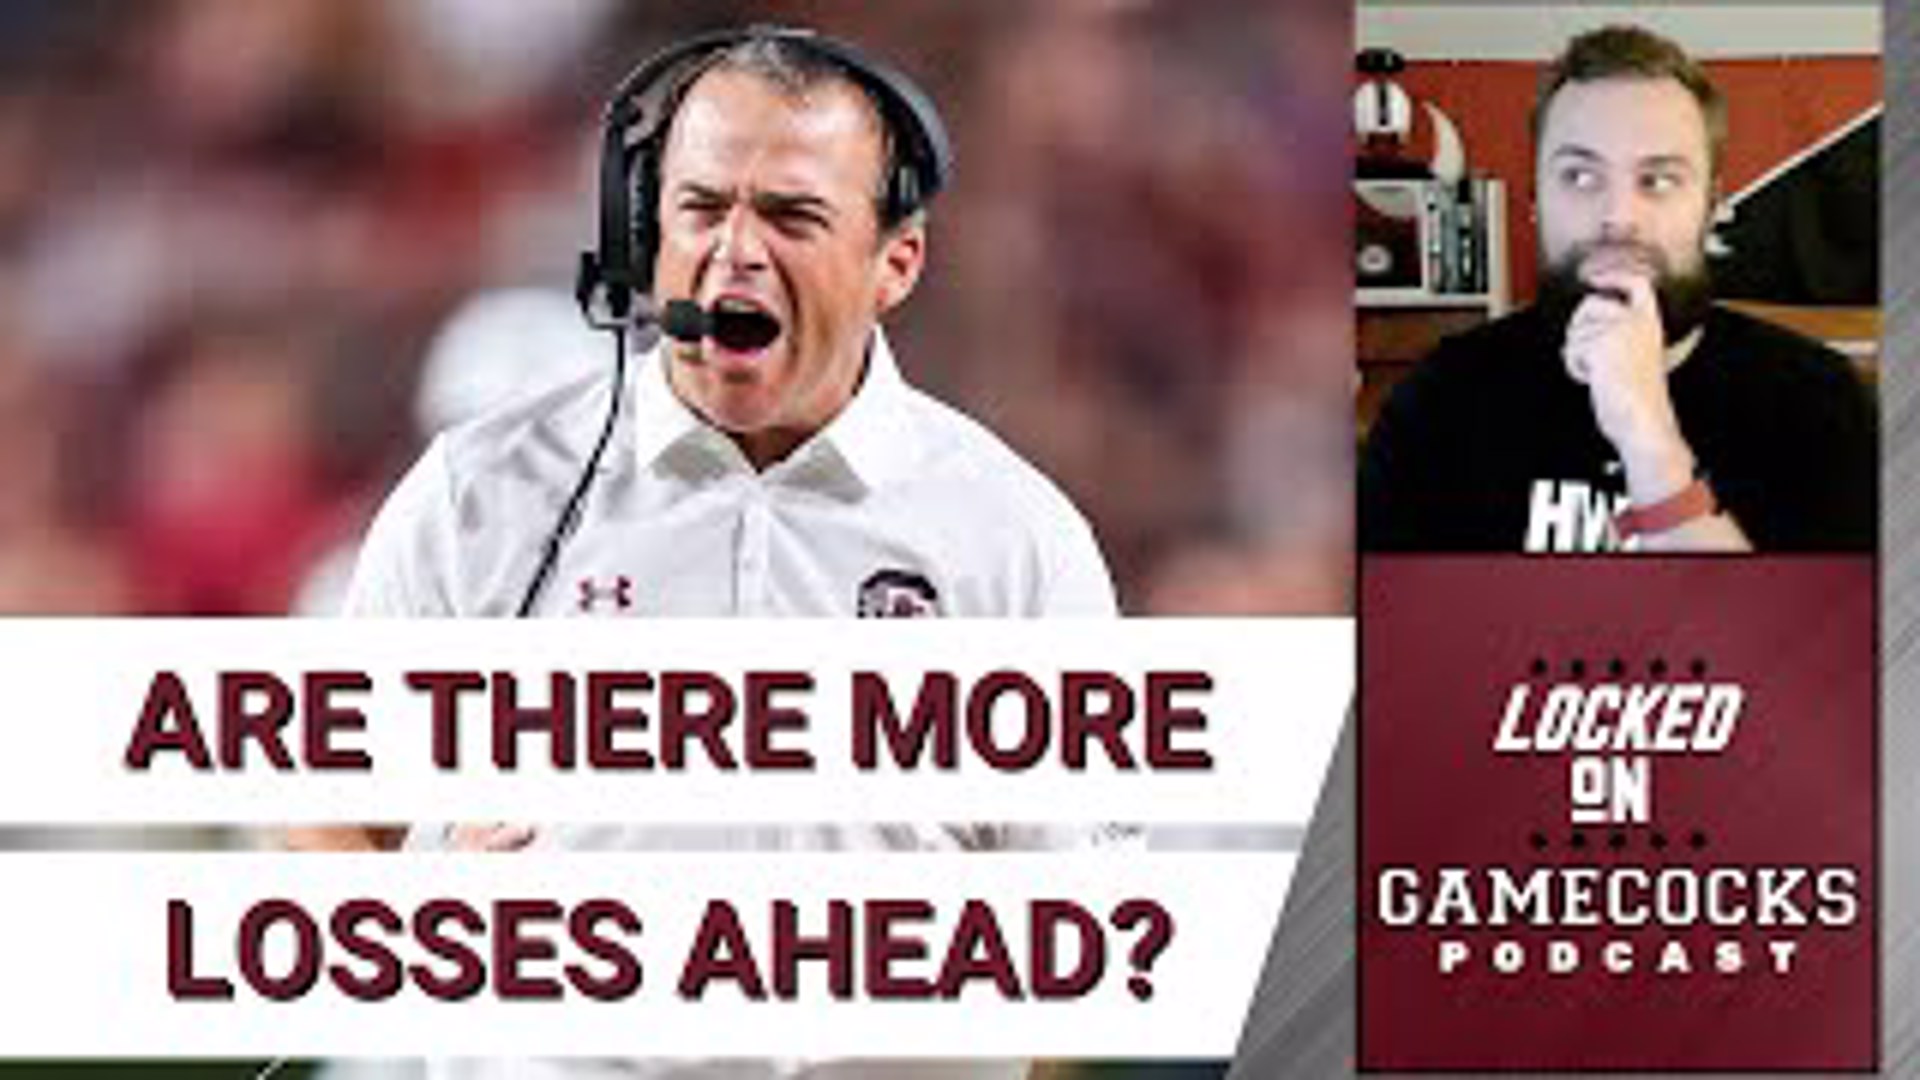 Andrew uses what we've now seen with the South Carolina Gamecocks' recent performances to see how the rest of the season might play out.